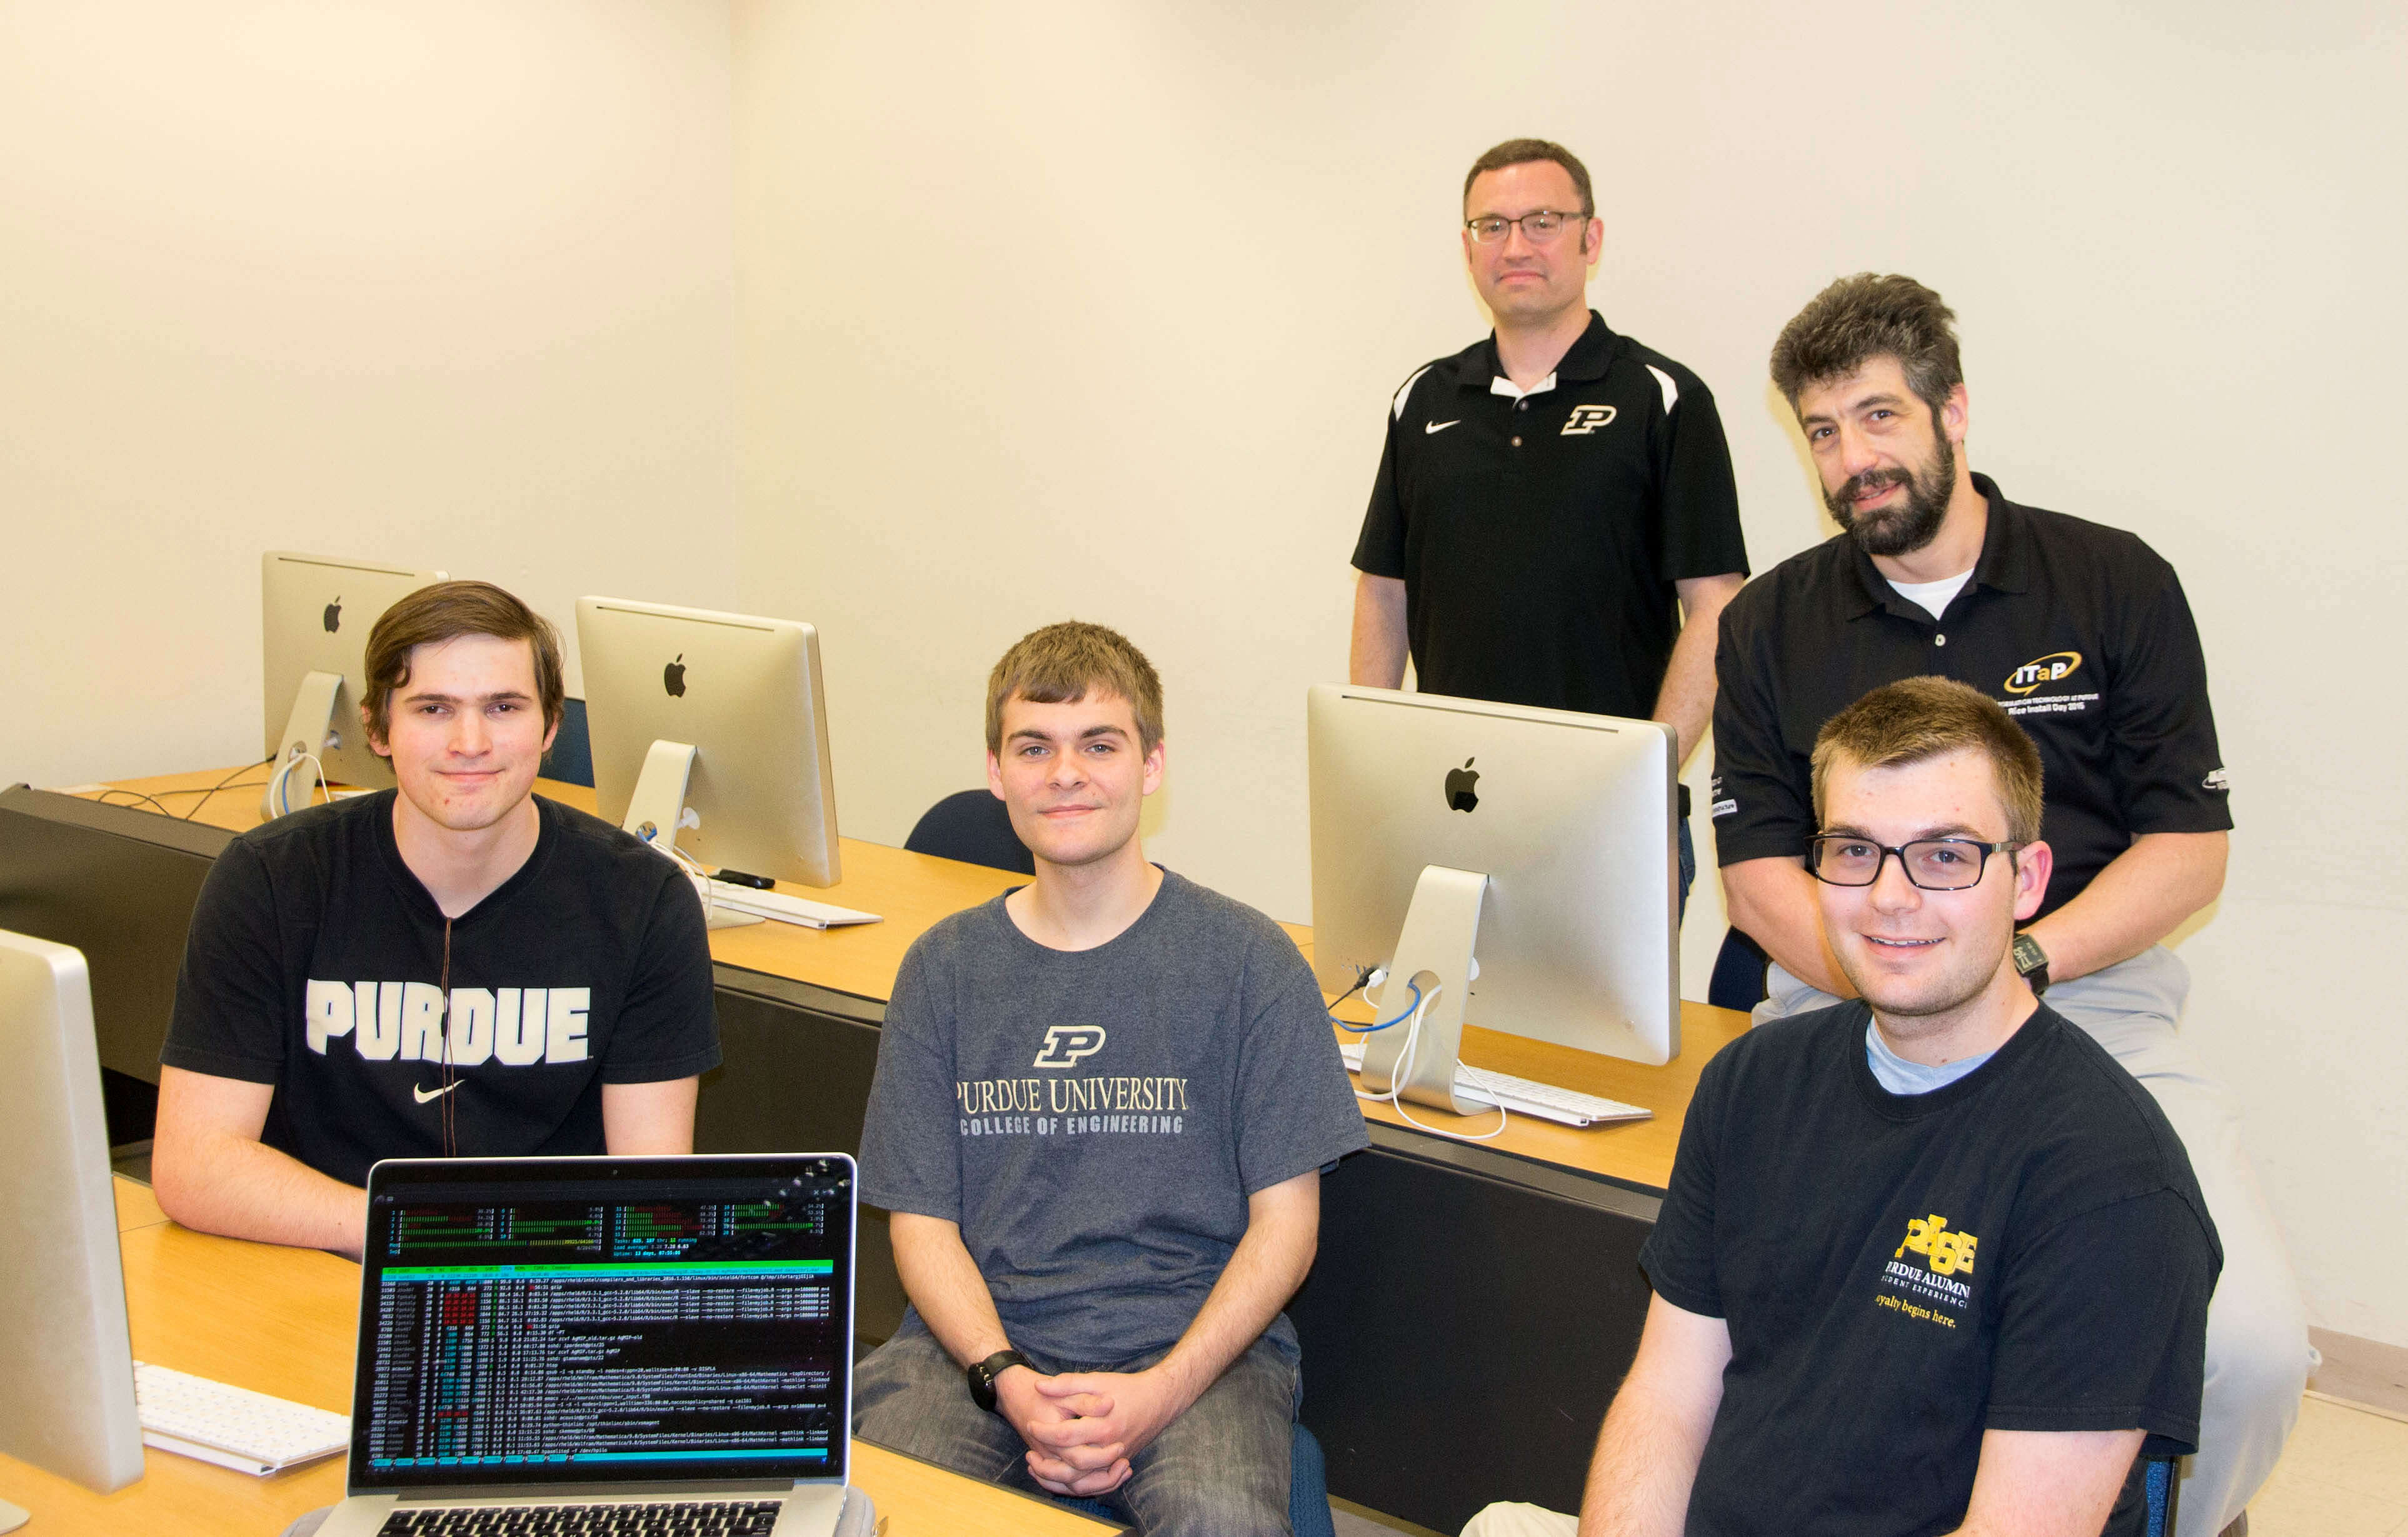 Team of Purdue, Northeastern students to compete at International  Supercomputing Conference - Purdue University News